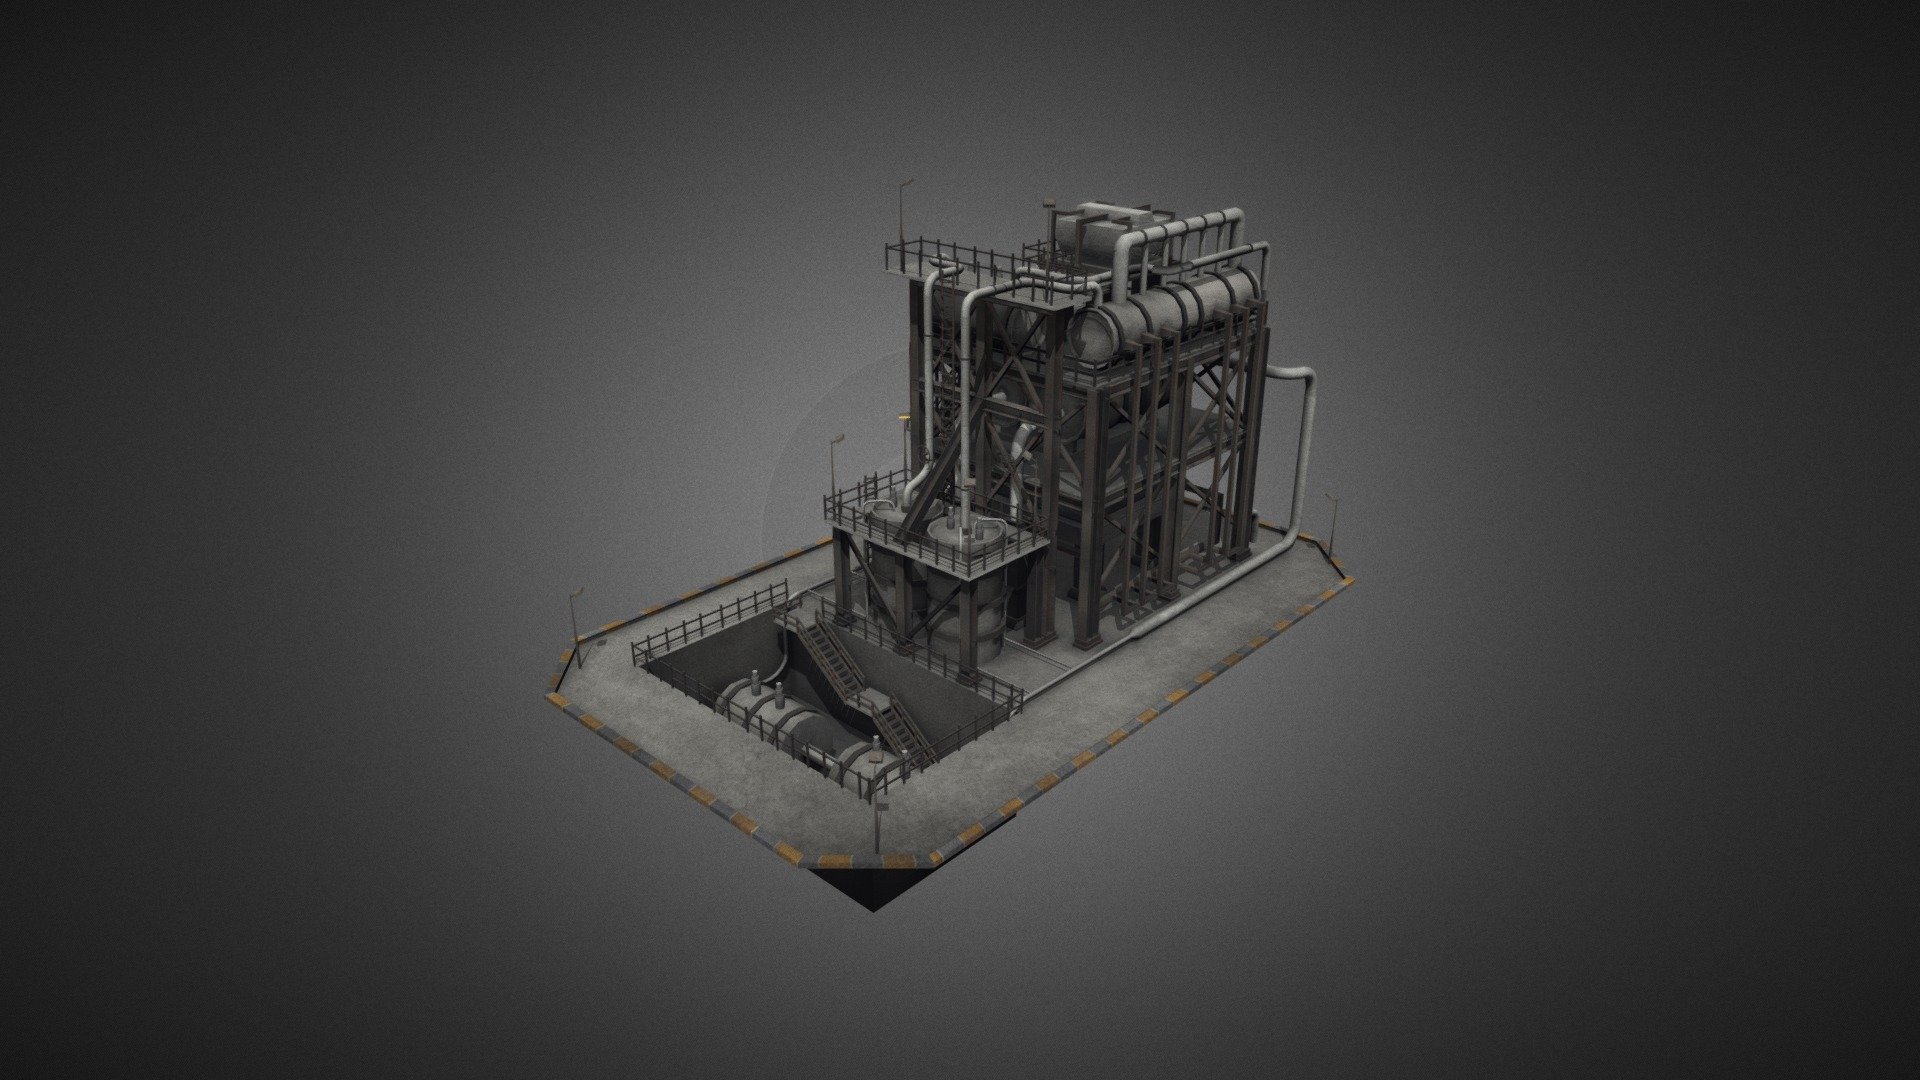 Low poly game-ready 3d model of an Oil Refinery 05 for Virtual Reality (VR), Augmented Reality (AR), games and other real-time apps 3d model